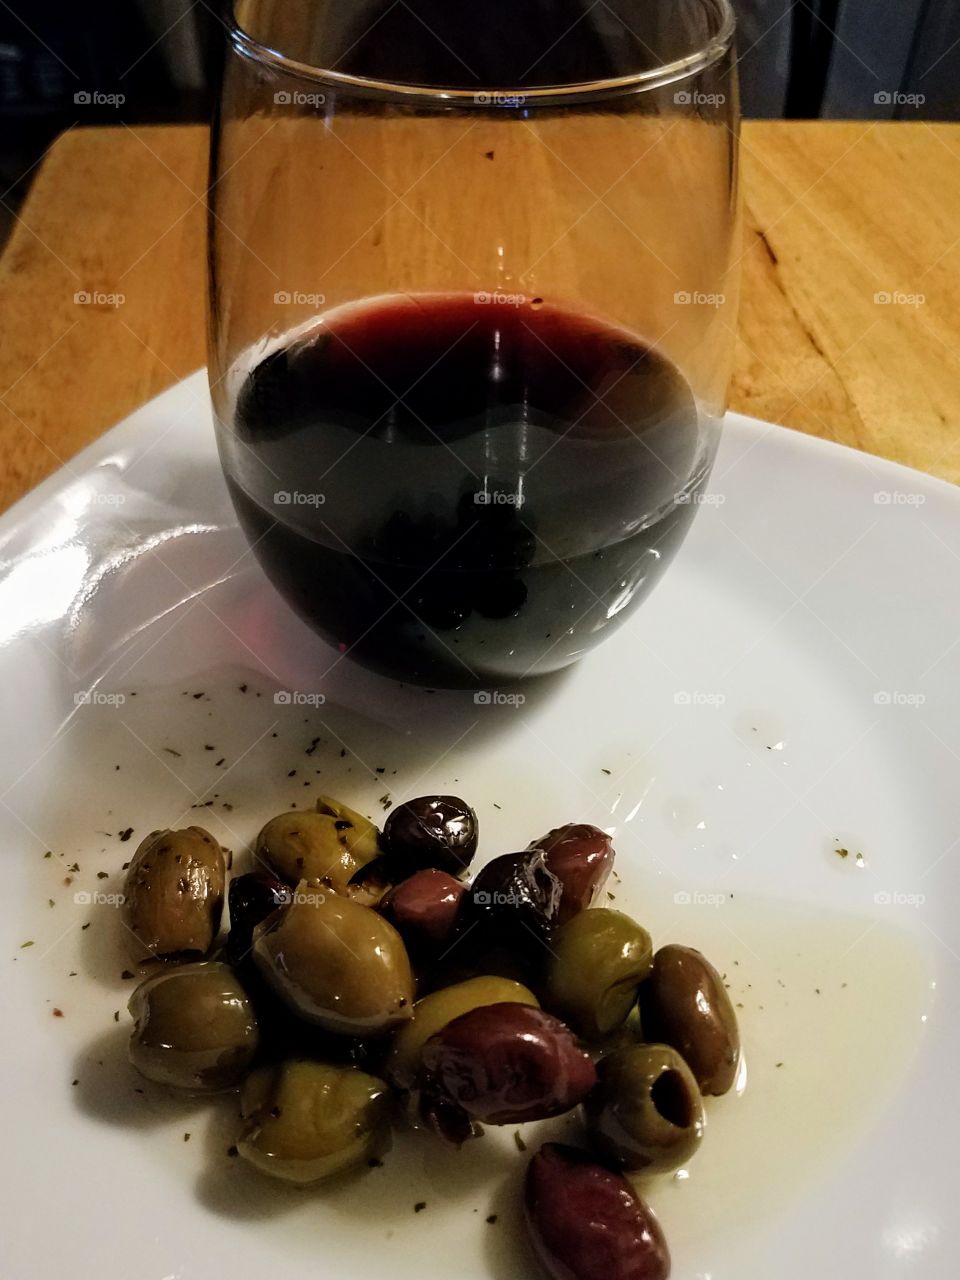 Chianti and olives